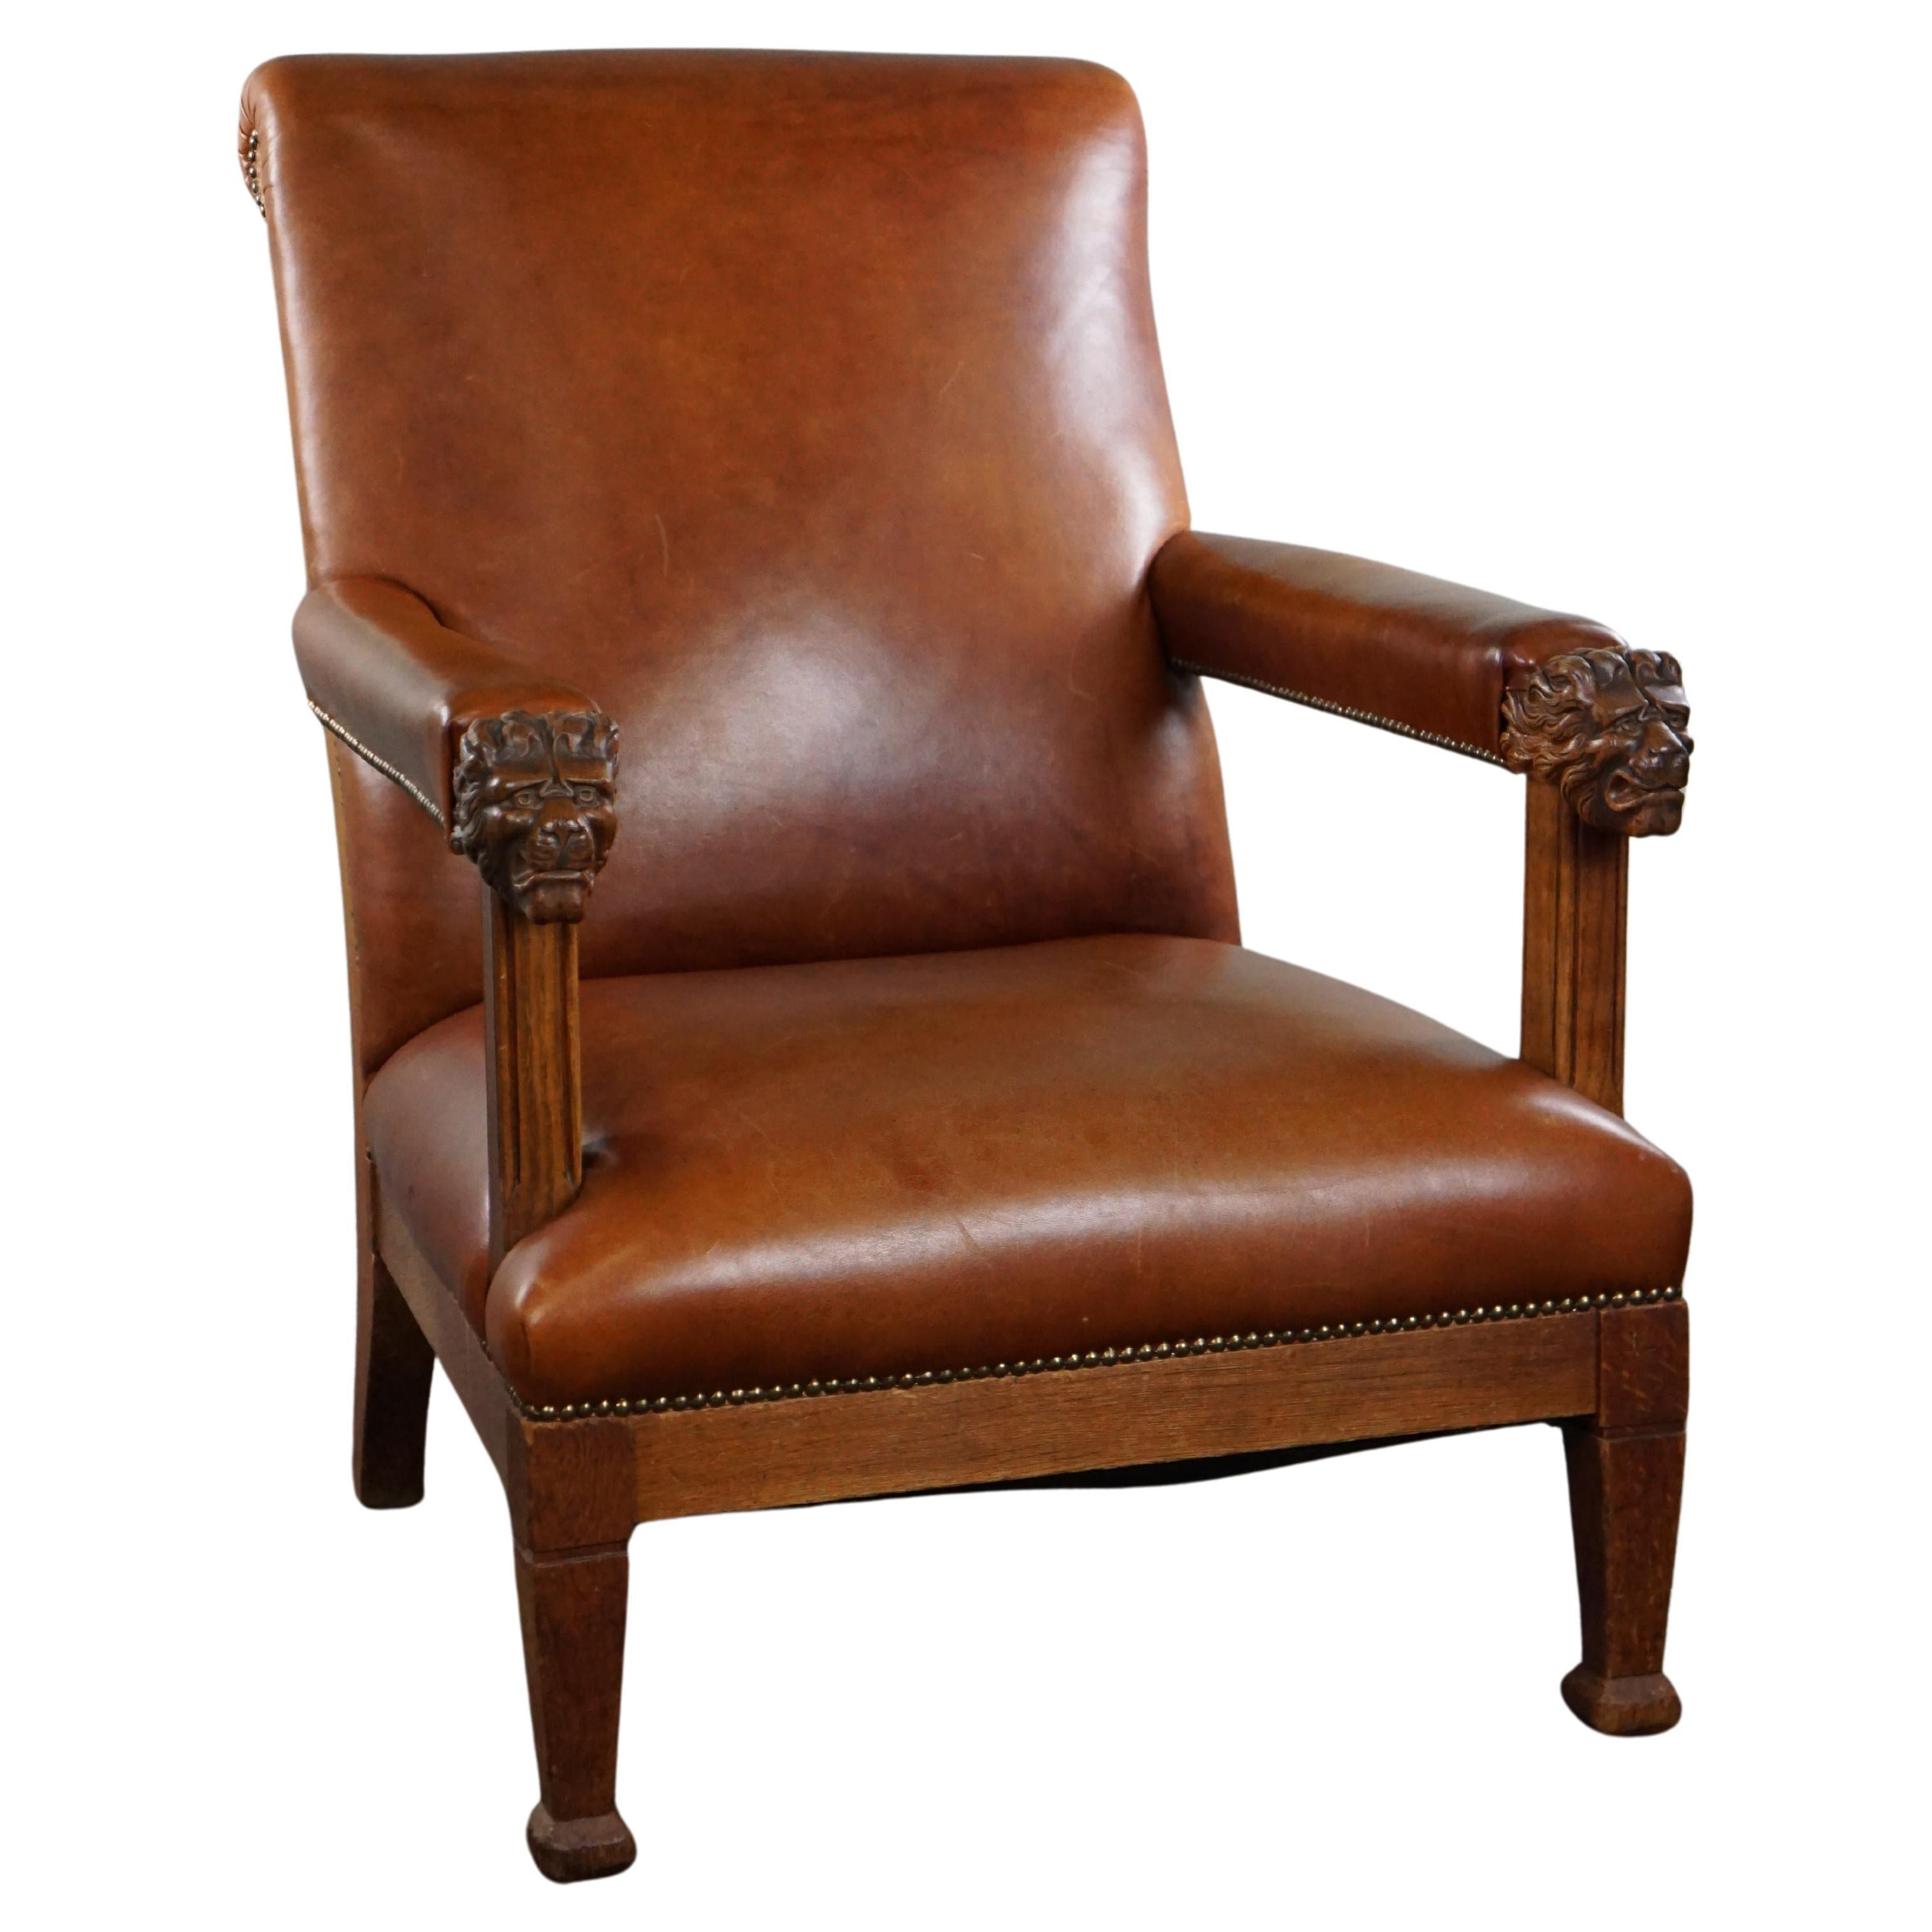 Armchair with lion heads reupholstered in cognac-colored cowhide For Sale